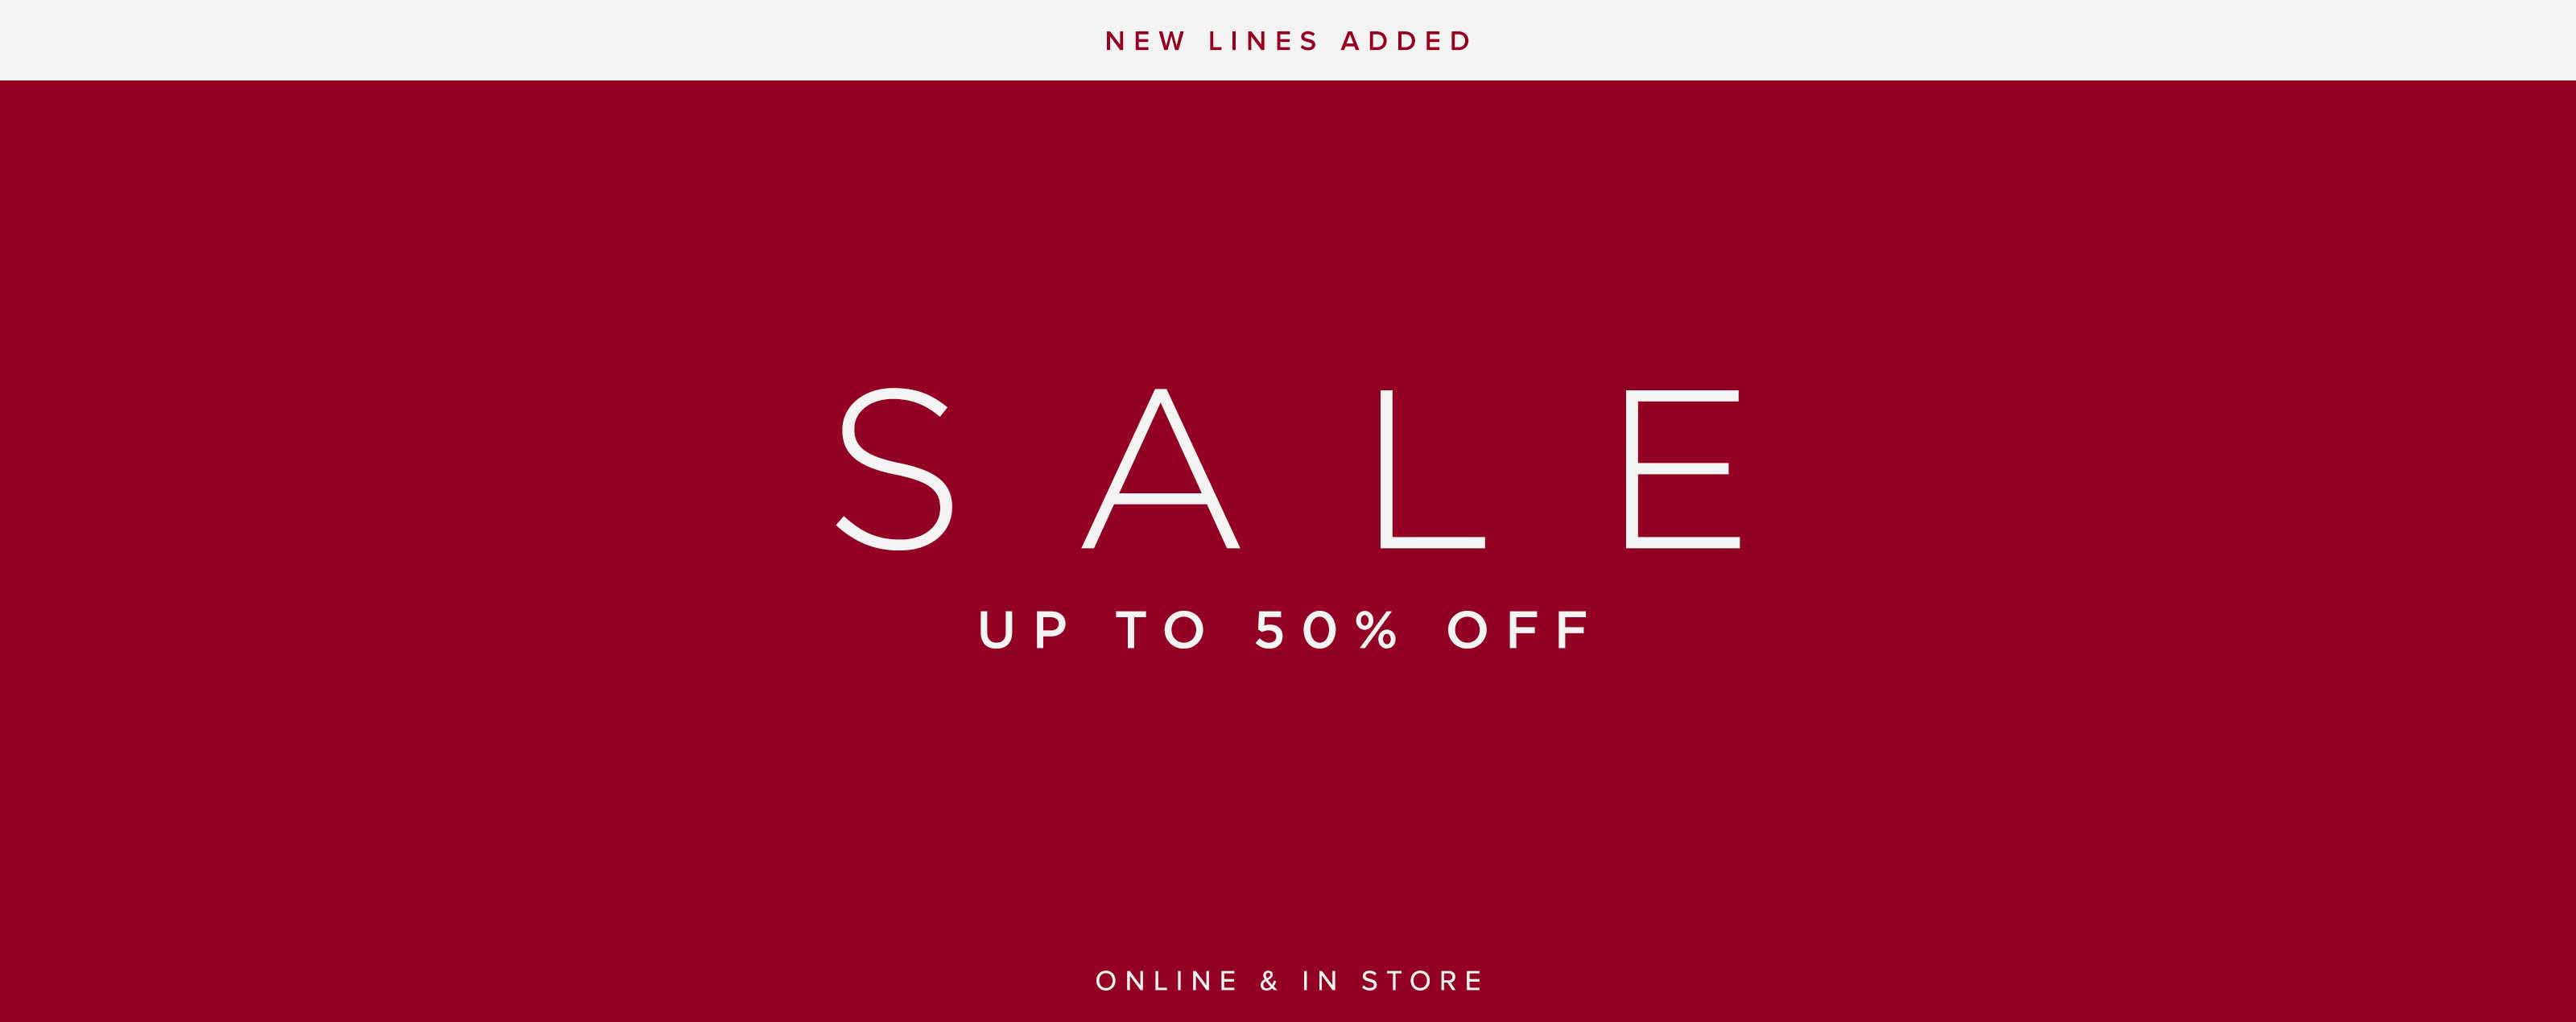 Hobbs Sale Now Up To 60% Off New Lines Added